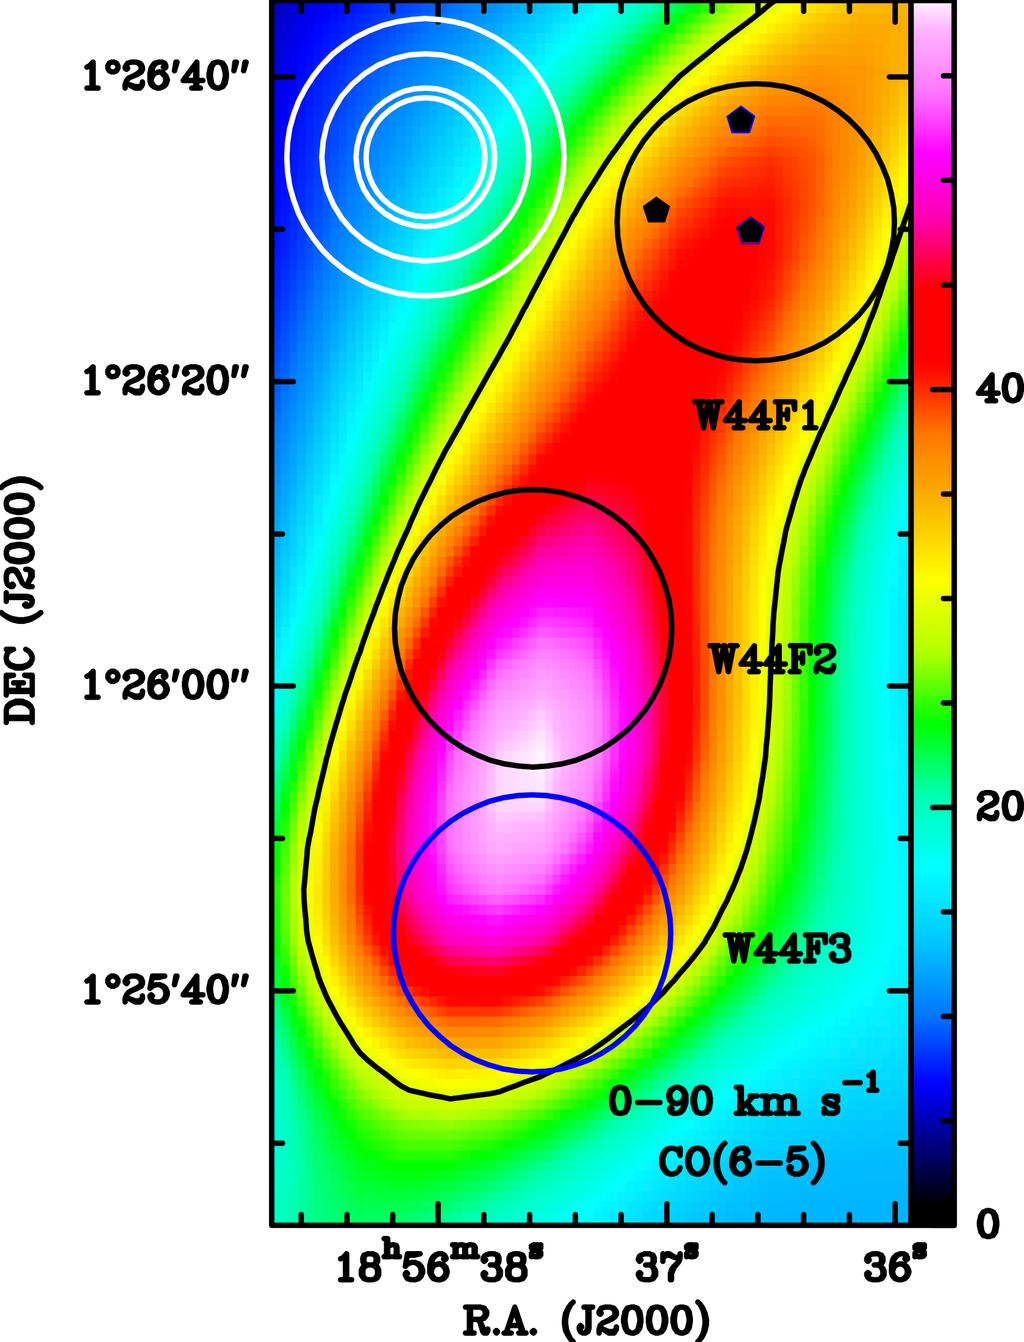 Non-stationary magneto-hydrodynamical shocks in W44 Figure 2: Central Panel: Positions of our analysis in W44E (W44E1: black circle, W44E2: blue circle) on the velocity-integrated CO (6 5) emission